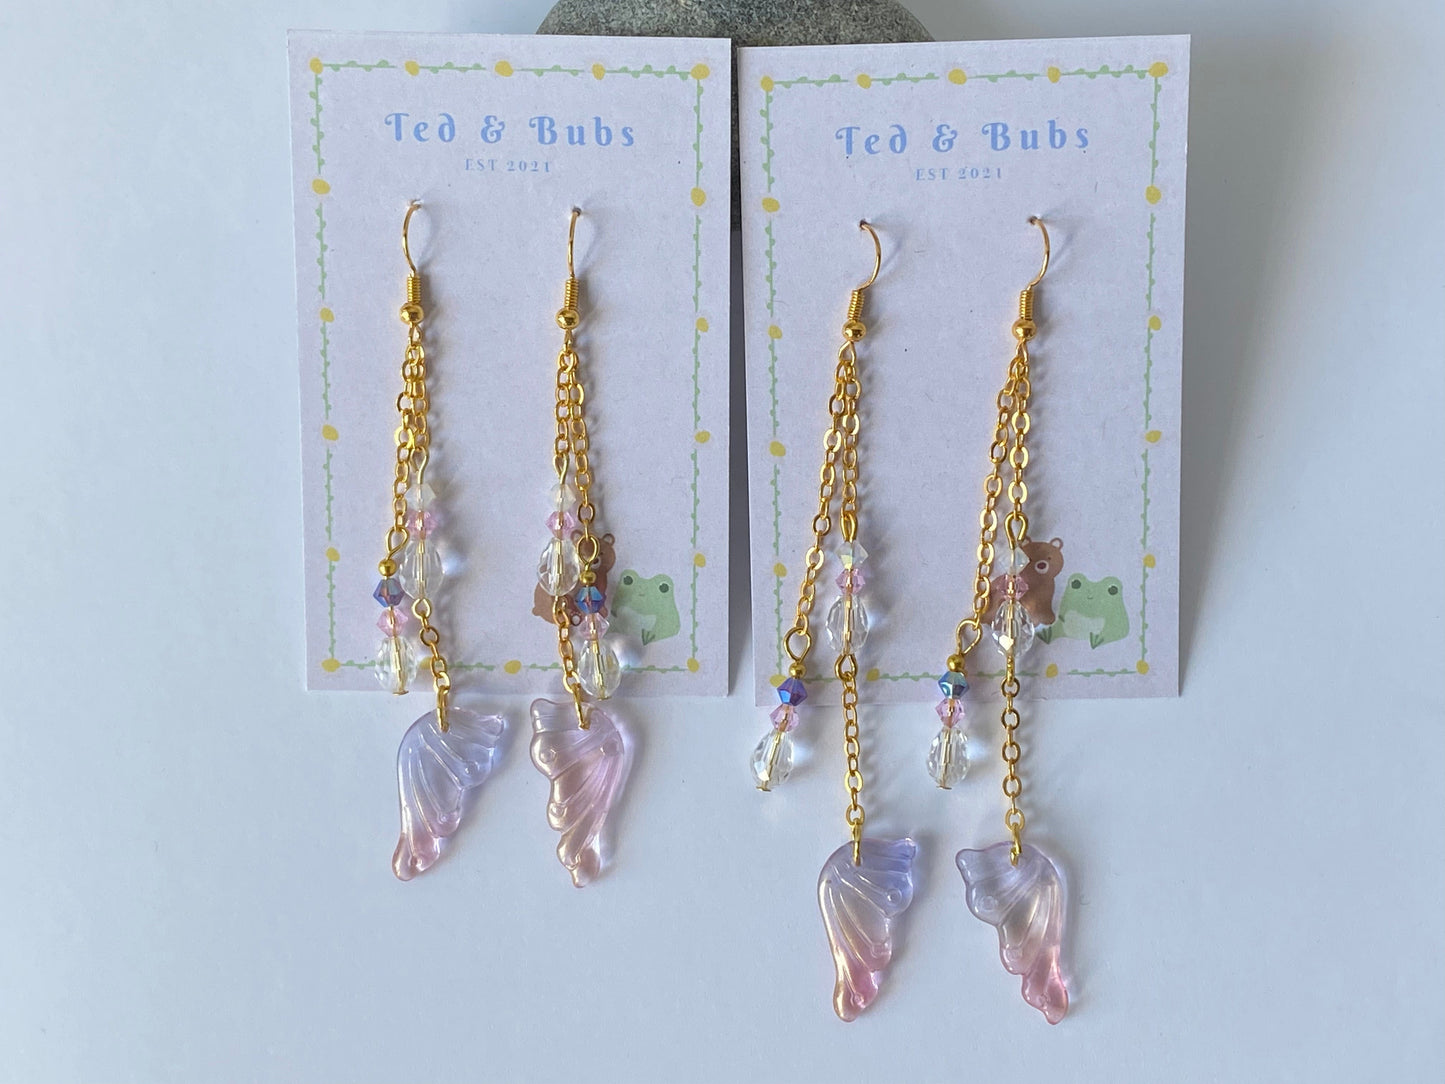 Ted & Bubs Earrings Fairy Wing Earrings - Ethereal Gold